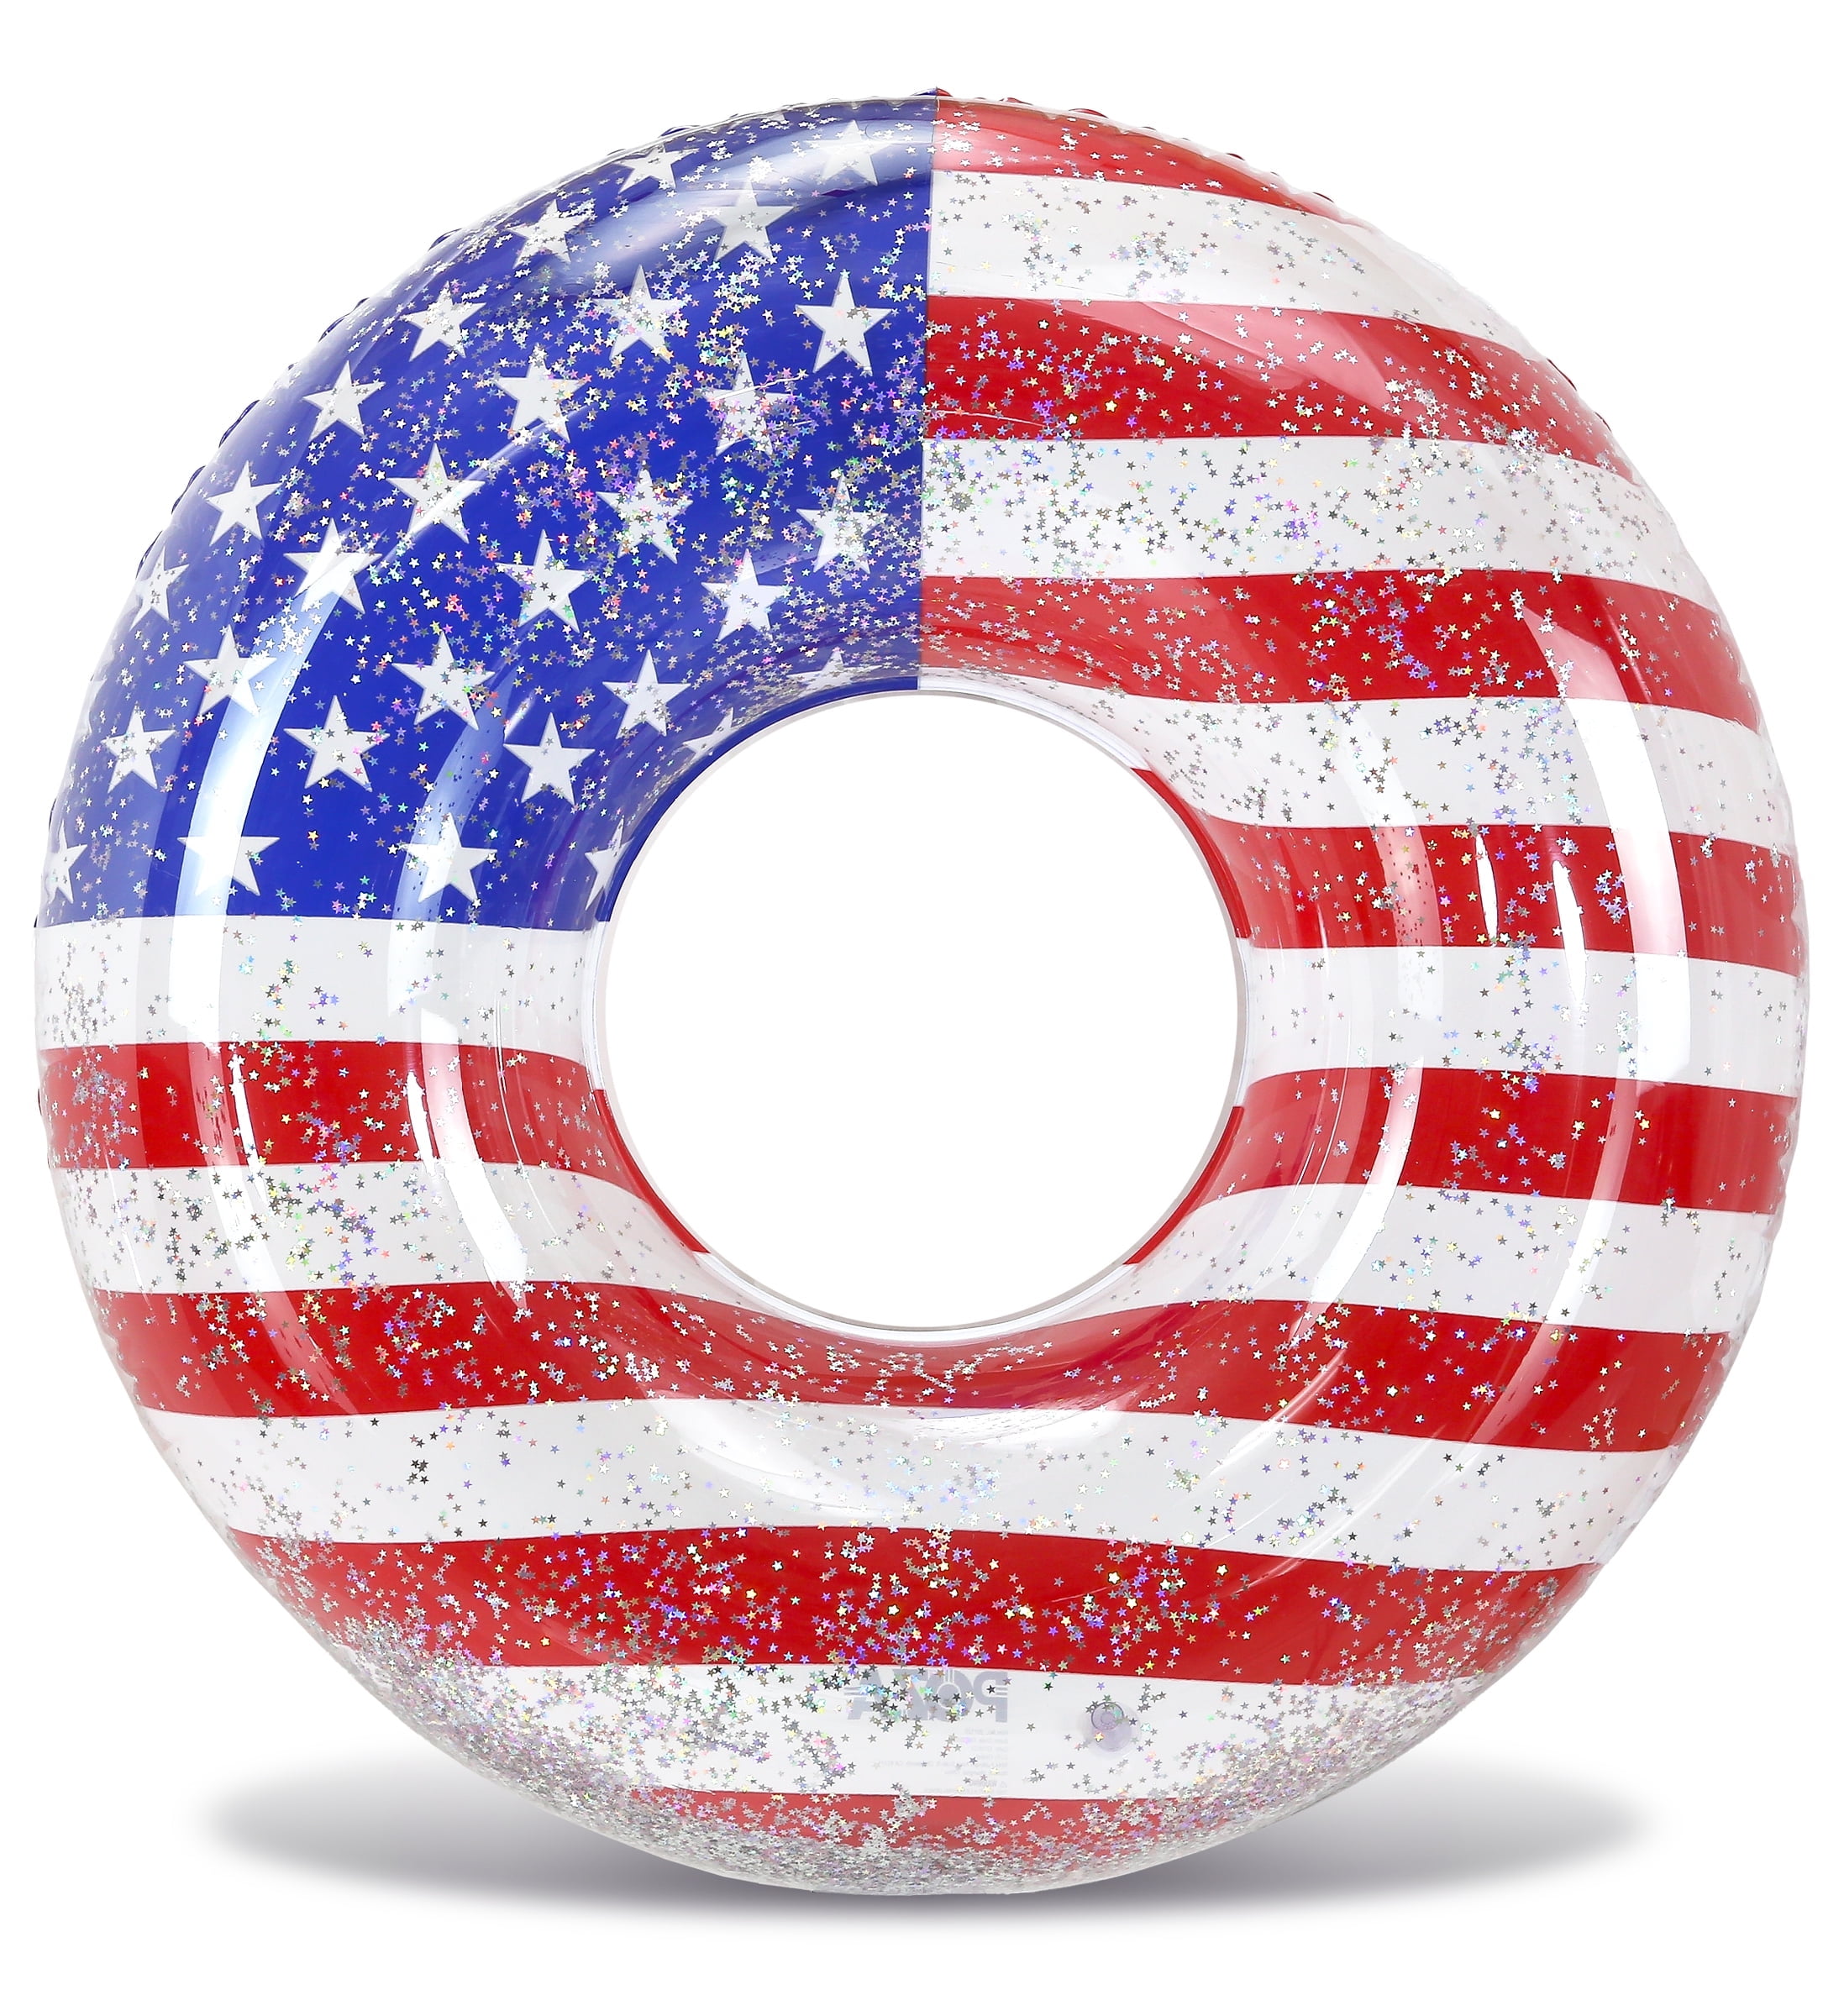 Sratte 2 Pcs American Flag Float 43 Red White Blue Pool Floats USA Flag  River Tubes with Mesh Bottom, Stars Confetti, 2 Cup Holders, Headrest